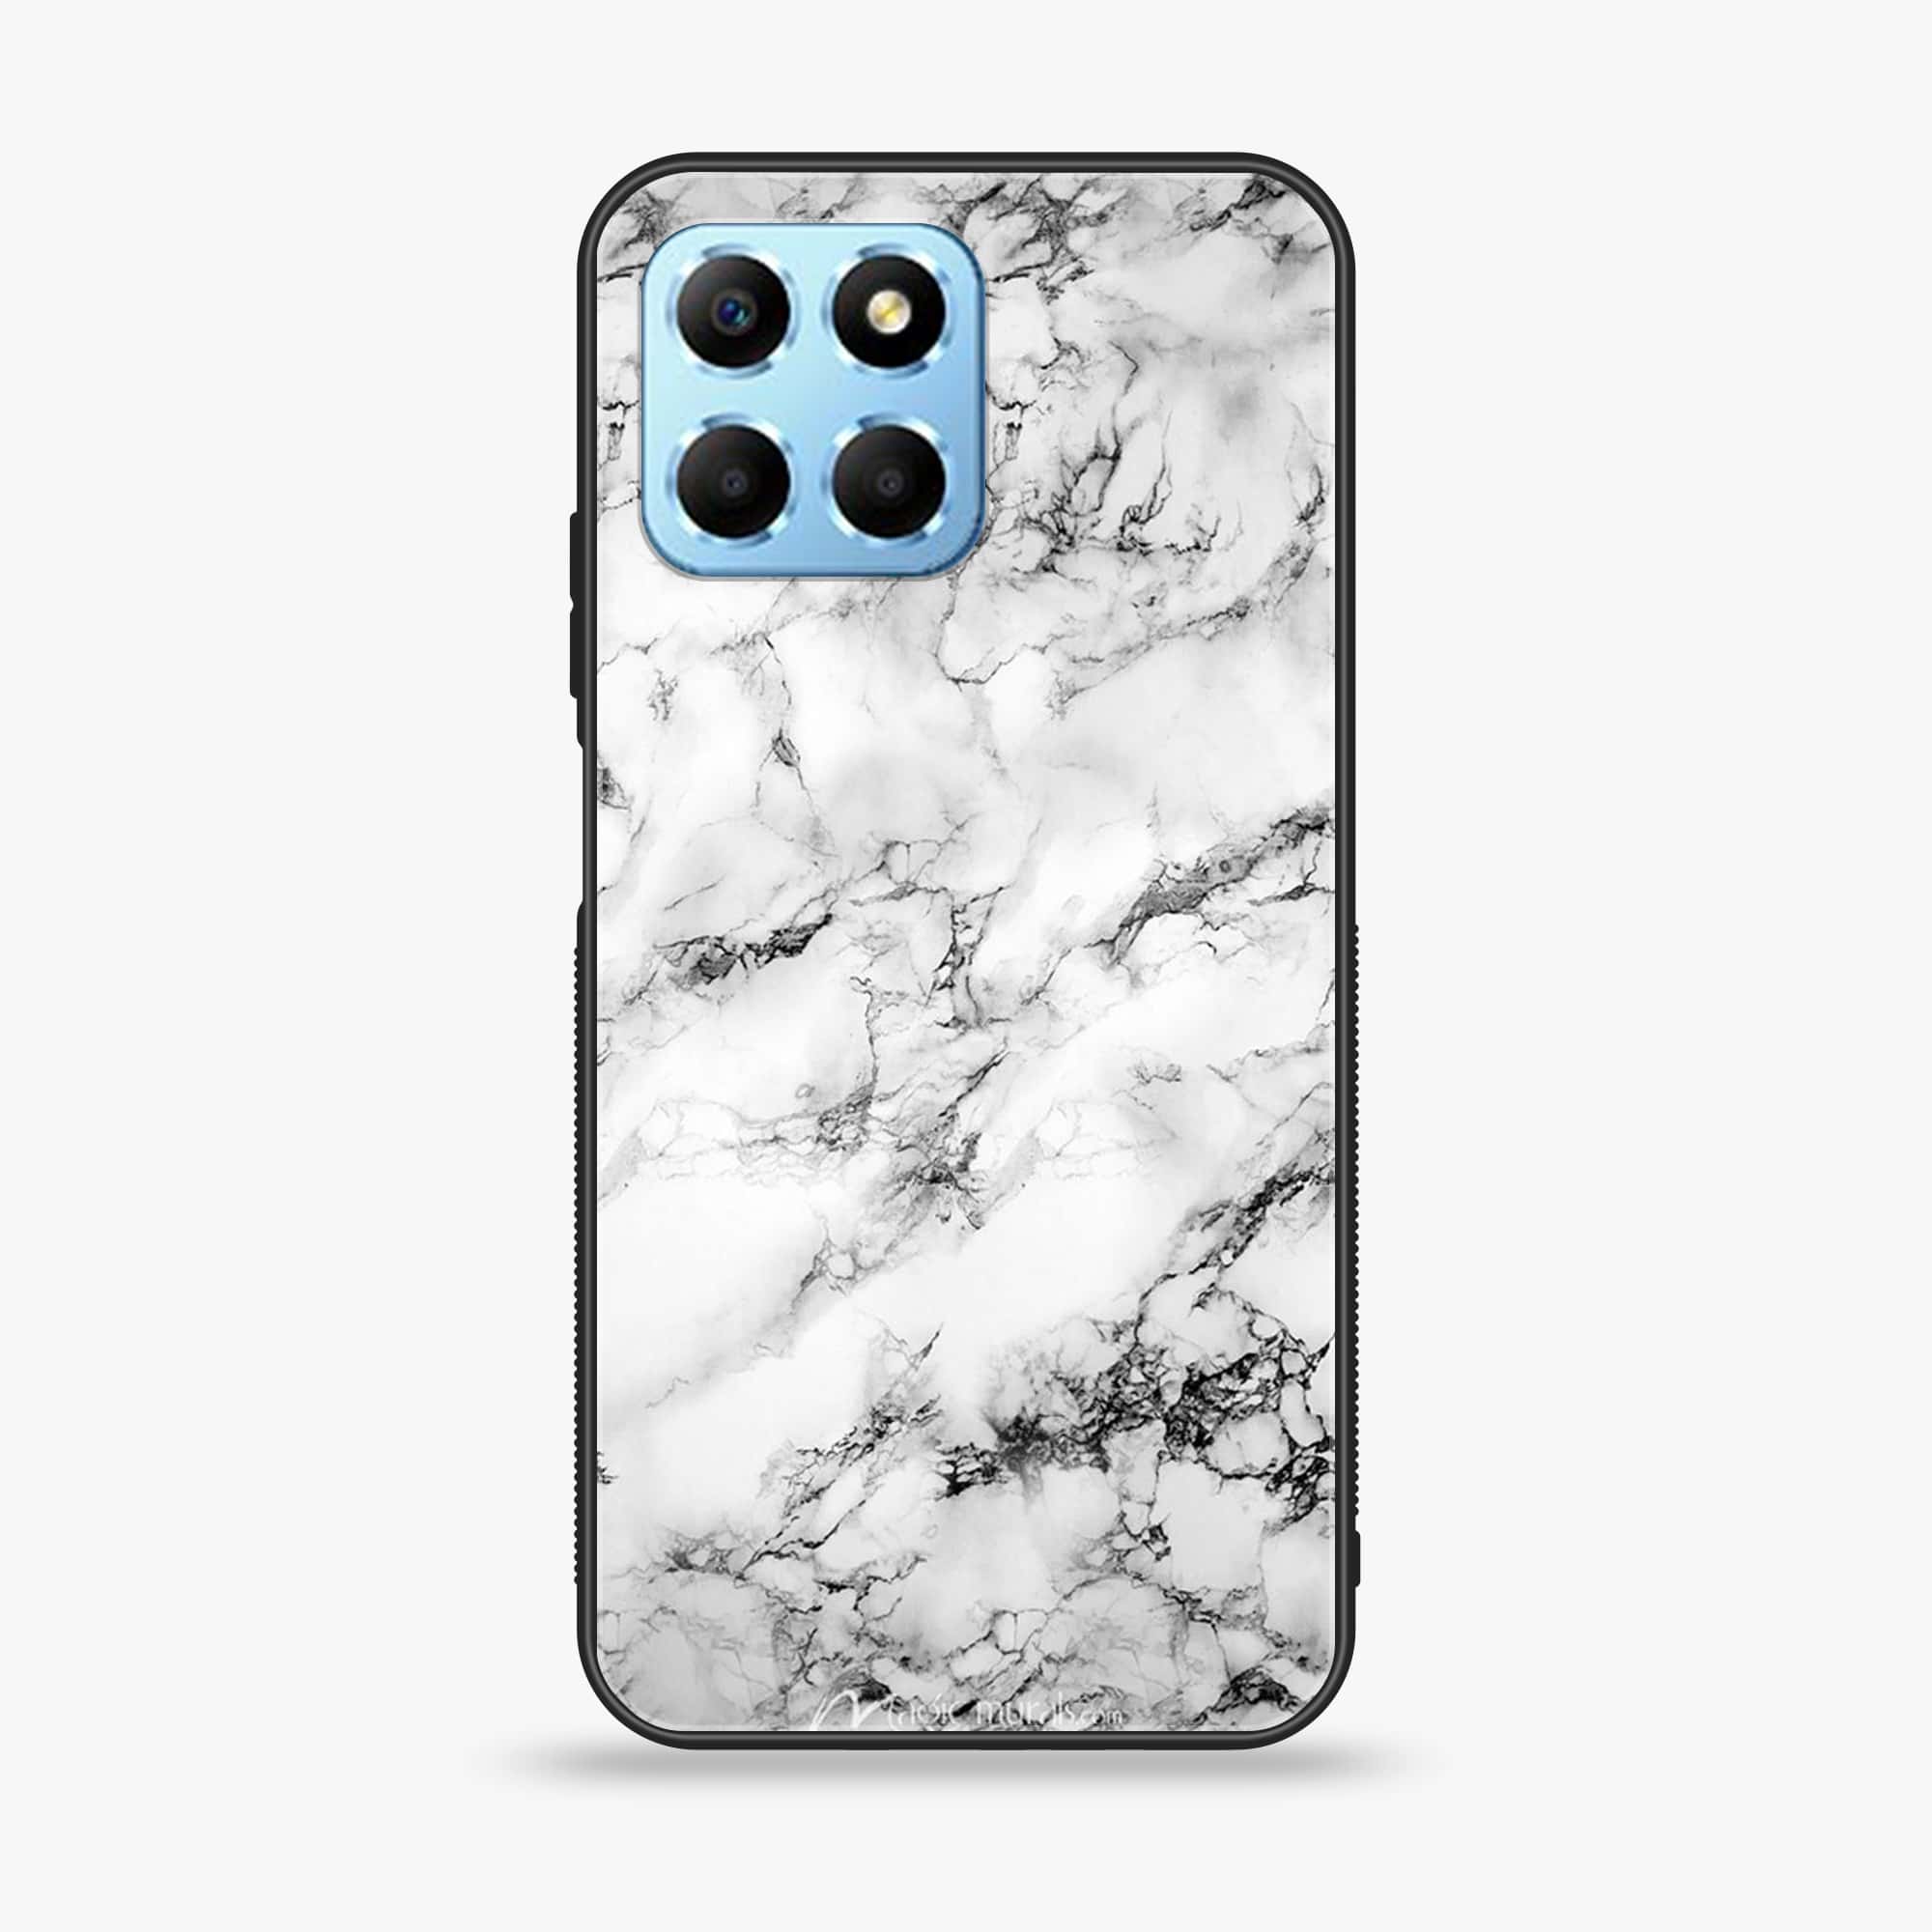 Honor X6 - White Marble Series - Premium Printed Glass soft Bumper shock Proof Case